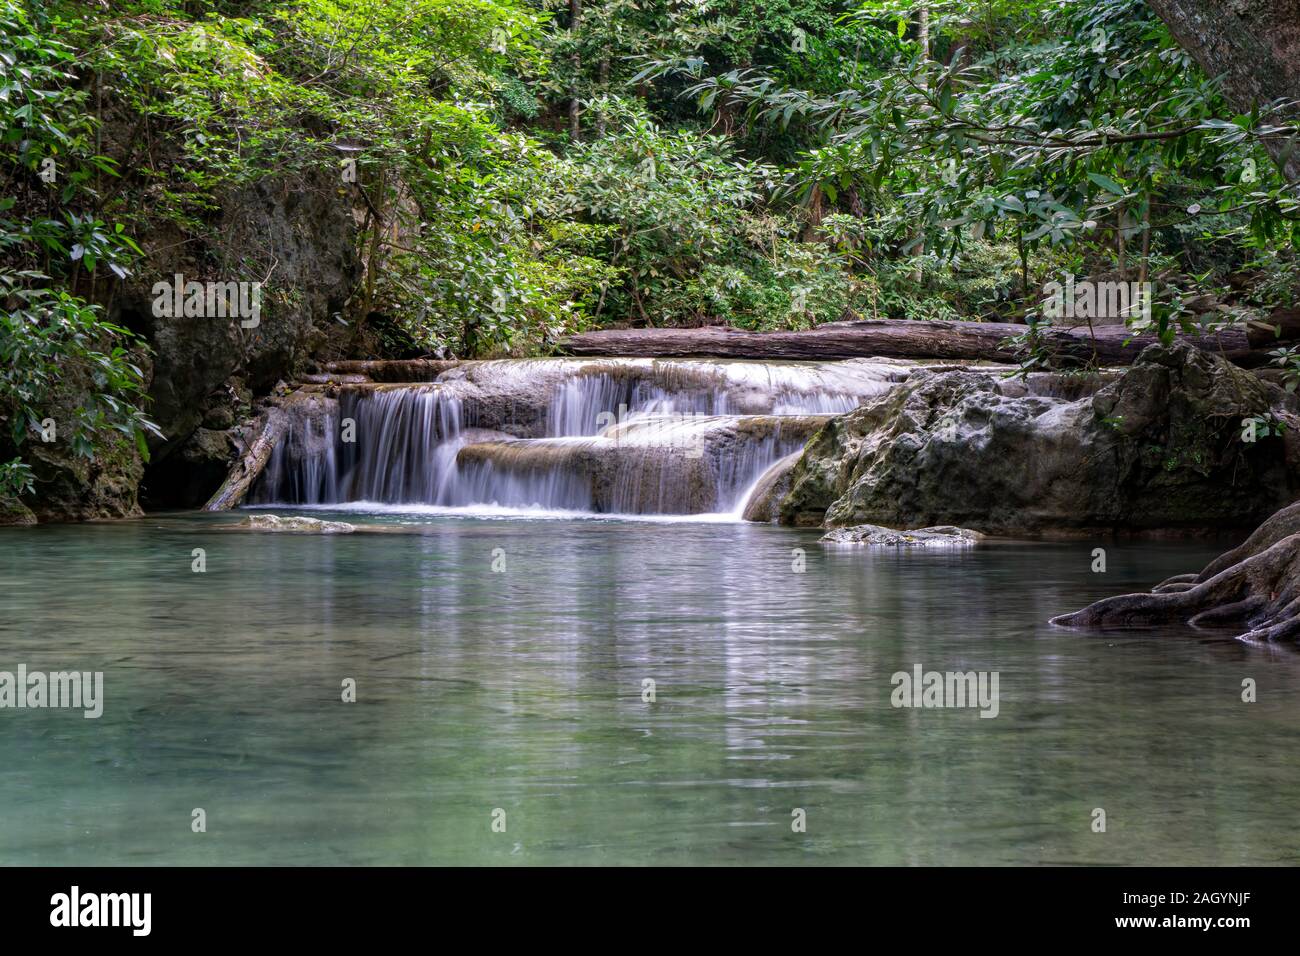 Clean green emerald water from the waterfall Surrounded by small trees - large trees,  green colour, Erawan waterfall, Kanchanaburi province, Thailand Stock Photo